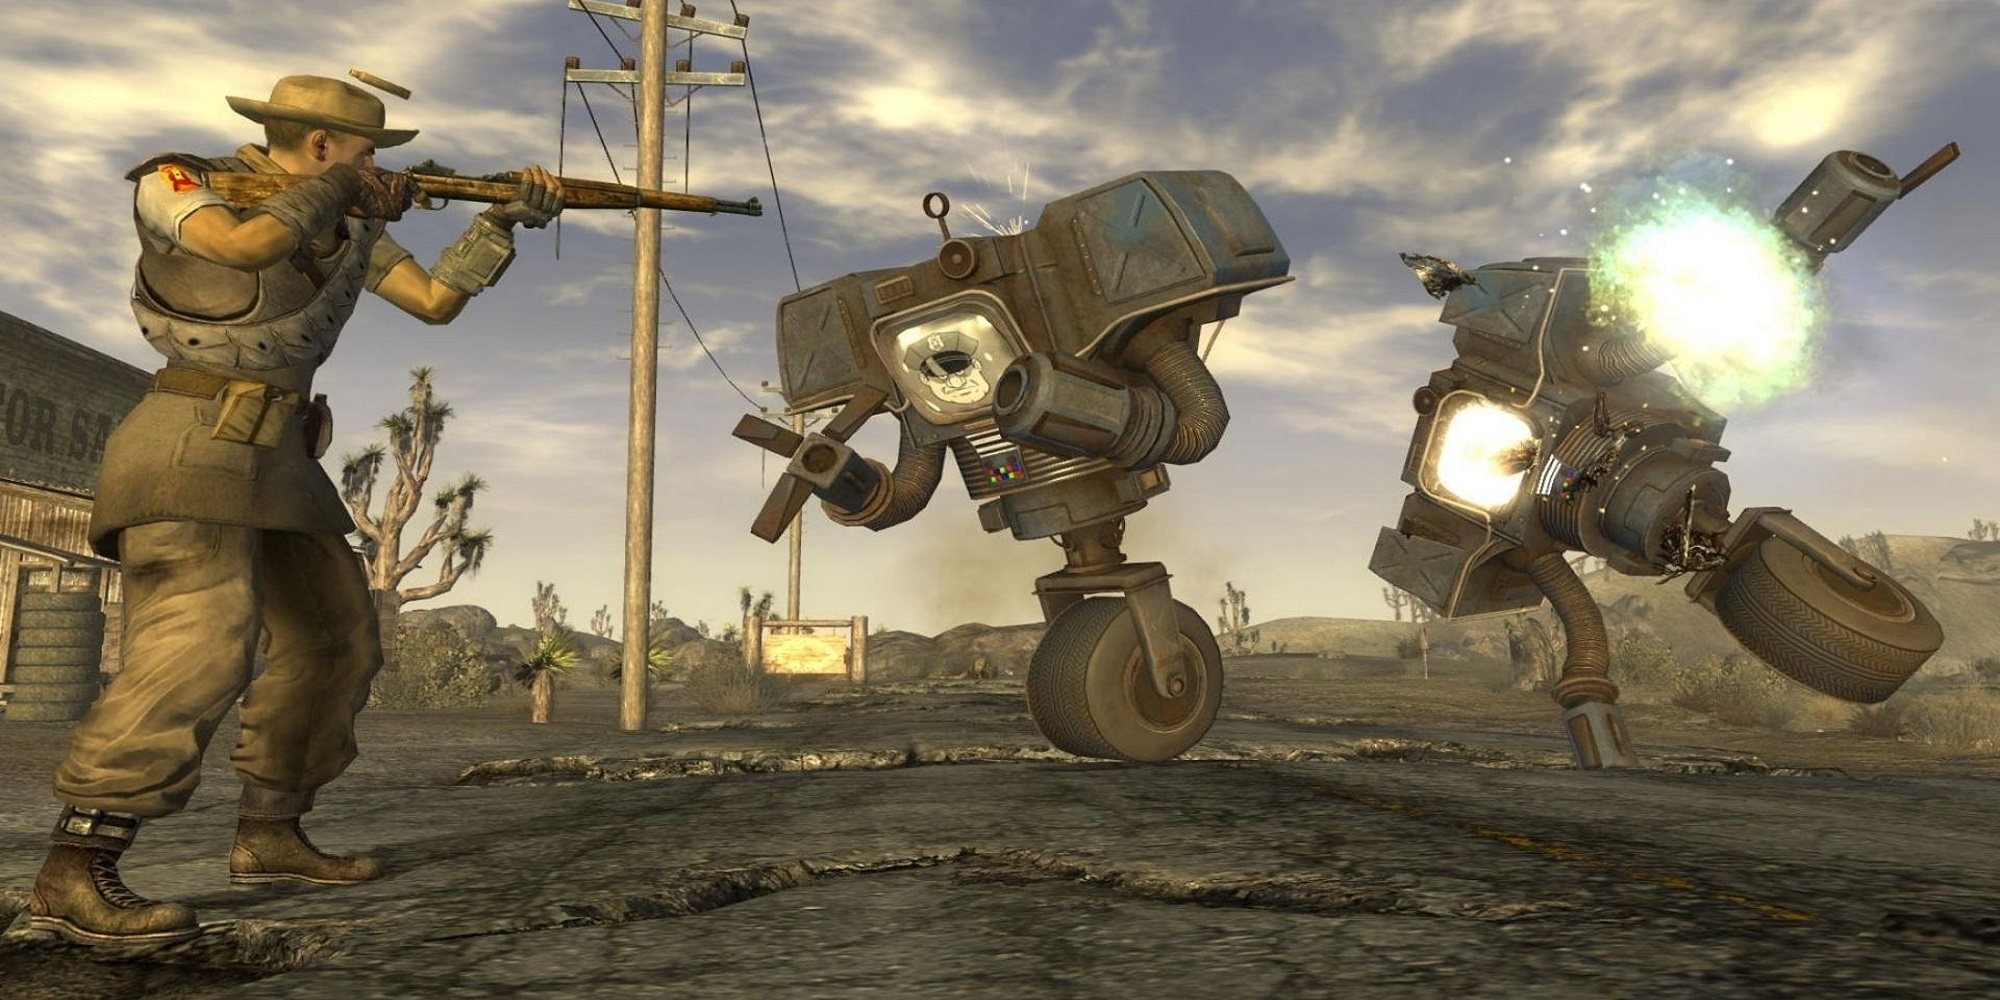 Robots being shot by the playable character in Fallout New Vegas